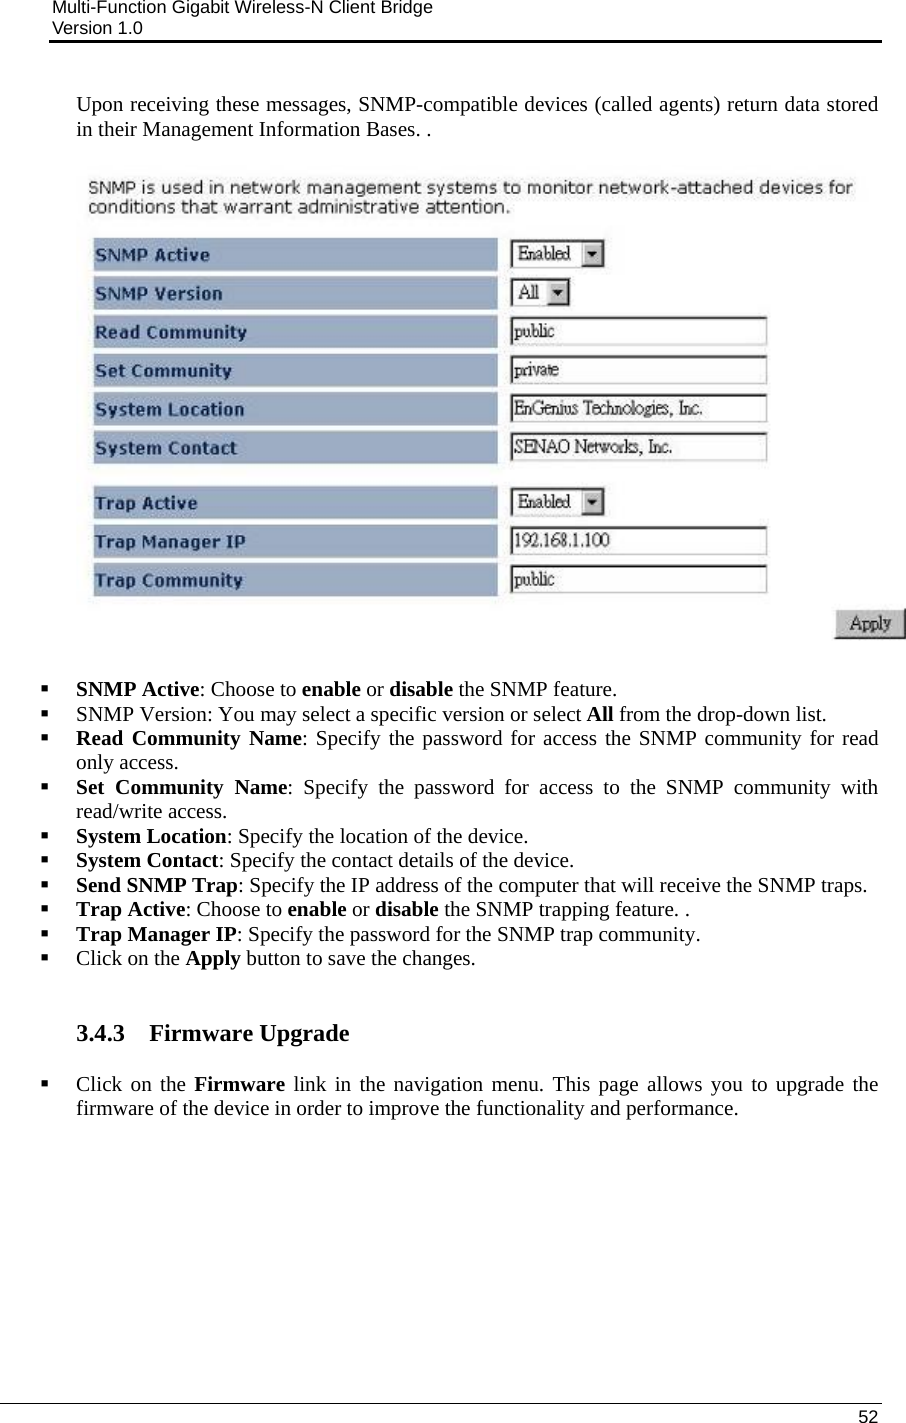 Multi-Function Gigabit Wireless-N Client Bridge                                         Version 1.0    52  Upon receiving these messages, SNMP-compatible devices (called agents) return data stored in their Management Information Bases. .     SNMP Active: Choose to enable or disable the SNMP feature.  SNMP Version: You may select a specific version or select All from the drop-down list.   Read Community Name: Specify the password for access the SNMP community for read only access.   Set Community Name: Specify the password for access to the SNMP community with read/write access.   System Location: Specify the location of the device.  System Contact: Specify the contact details of the device.  Send SNMP Trap: Specify the IP address of the computer that will receive the SNMP traps.    Trap Active: Choose to enable or disable the SNMP trapping feature. .  Trap Manager IP: Specify the password for the SNMP trap community.  Click on the Apply button to save the changes.    3.4.3 Firmware Upgrade   Click on the Firmware link in the navigation menu. This page allows you to upgrade the firmware of the device in order to improve the functionality and performance.   